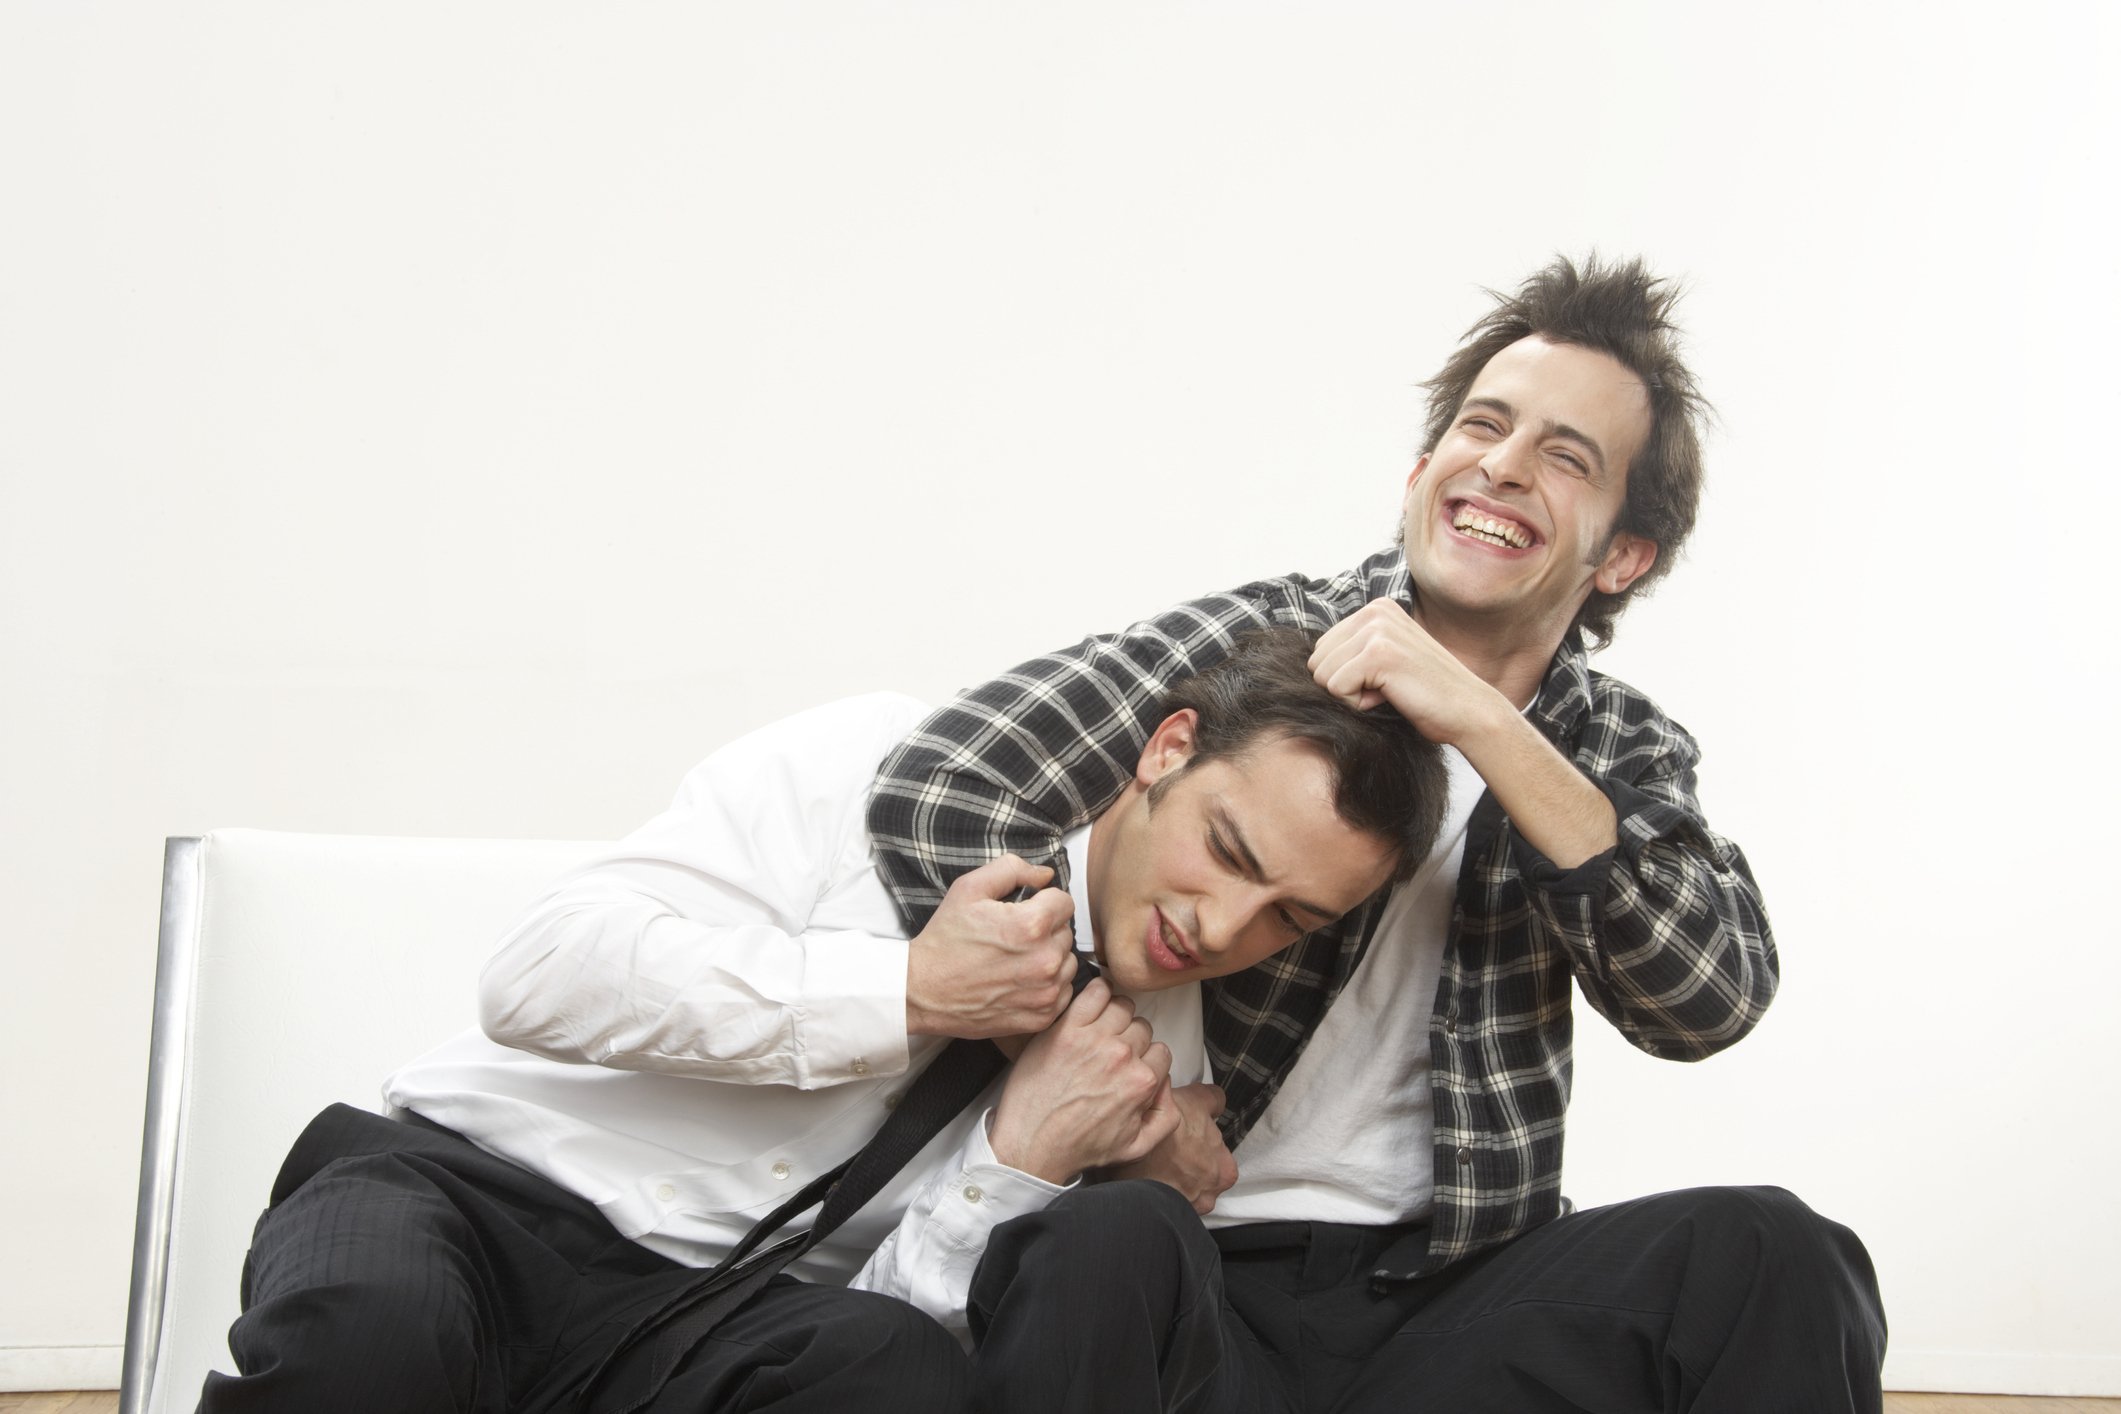 Twin brothers seated on a couch laugh out loud about something hilarious | Photo: Getty Images 